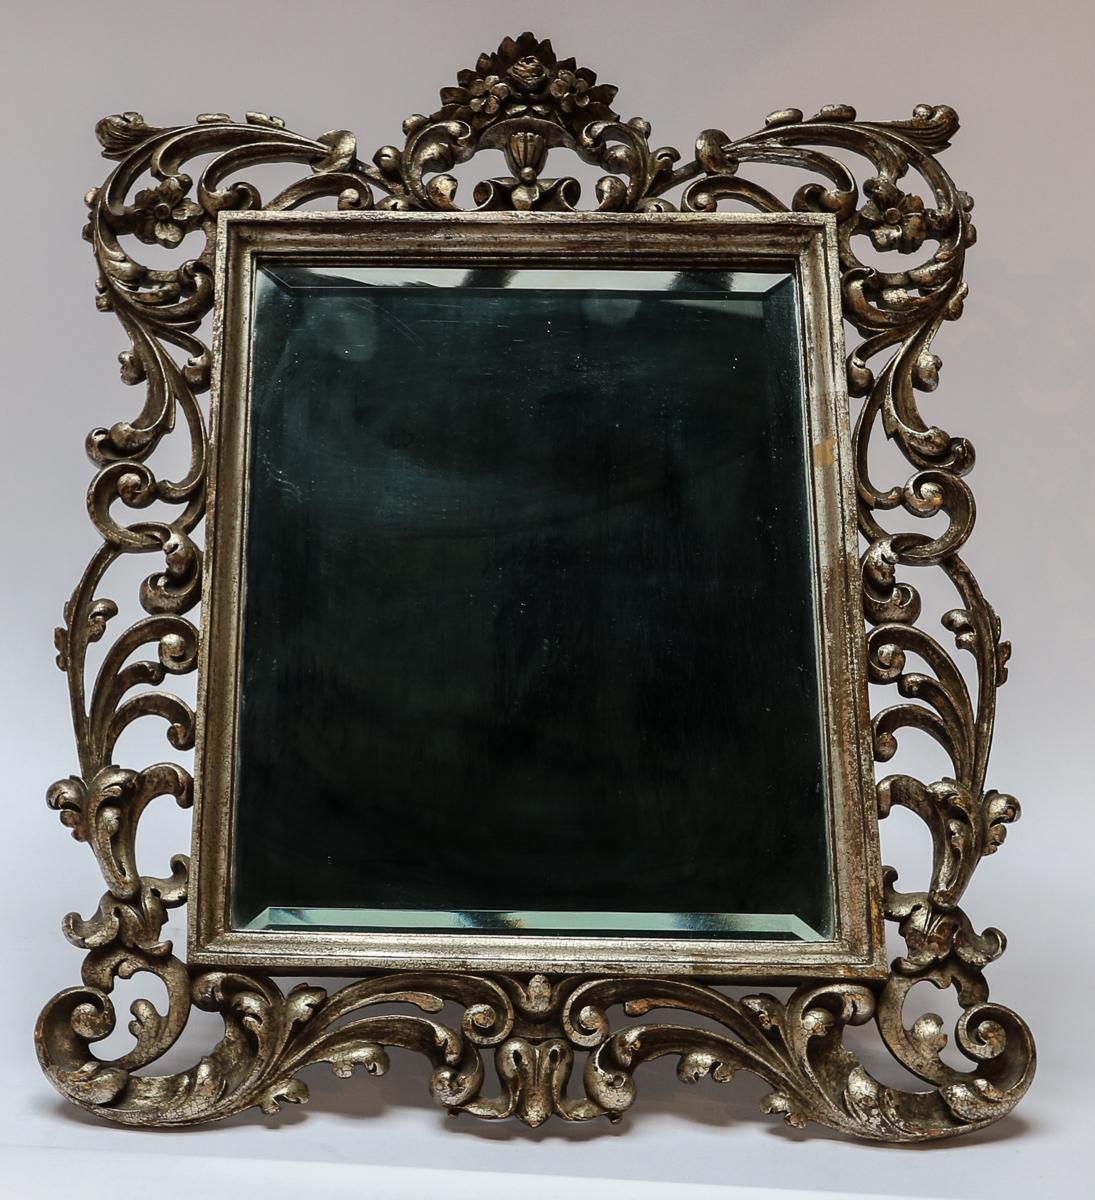 Ornately carved 19th century Baroque style vanity or wall mirror of silver giltwood and beveled glass. Can also be hung on the wall with the attached wire.